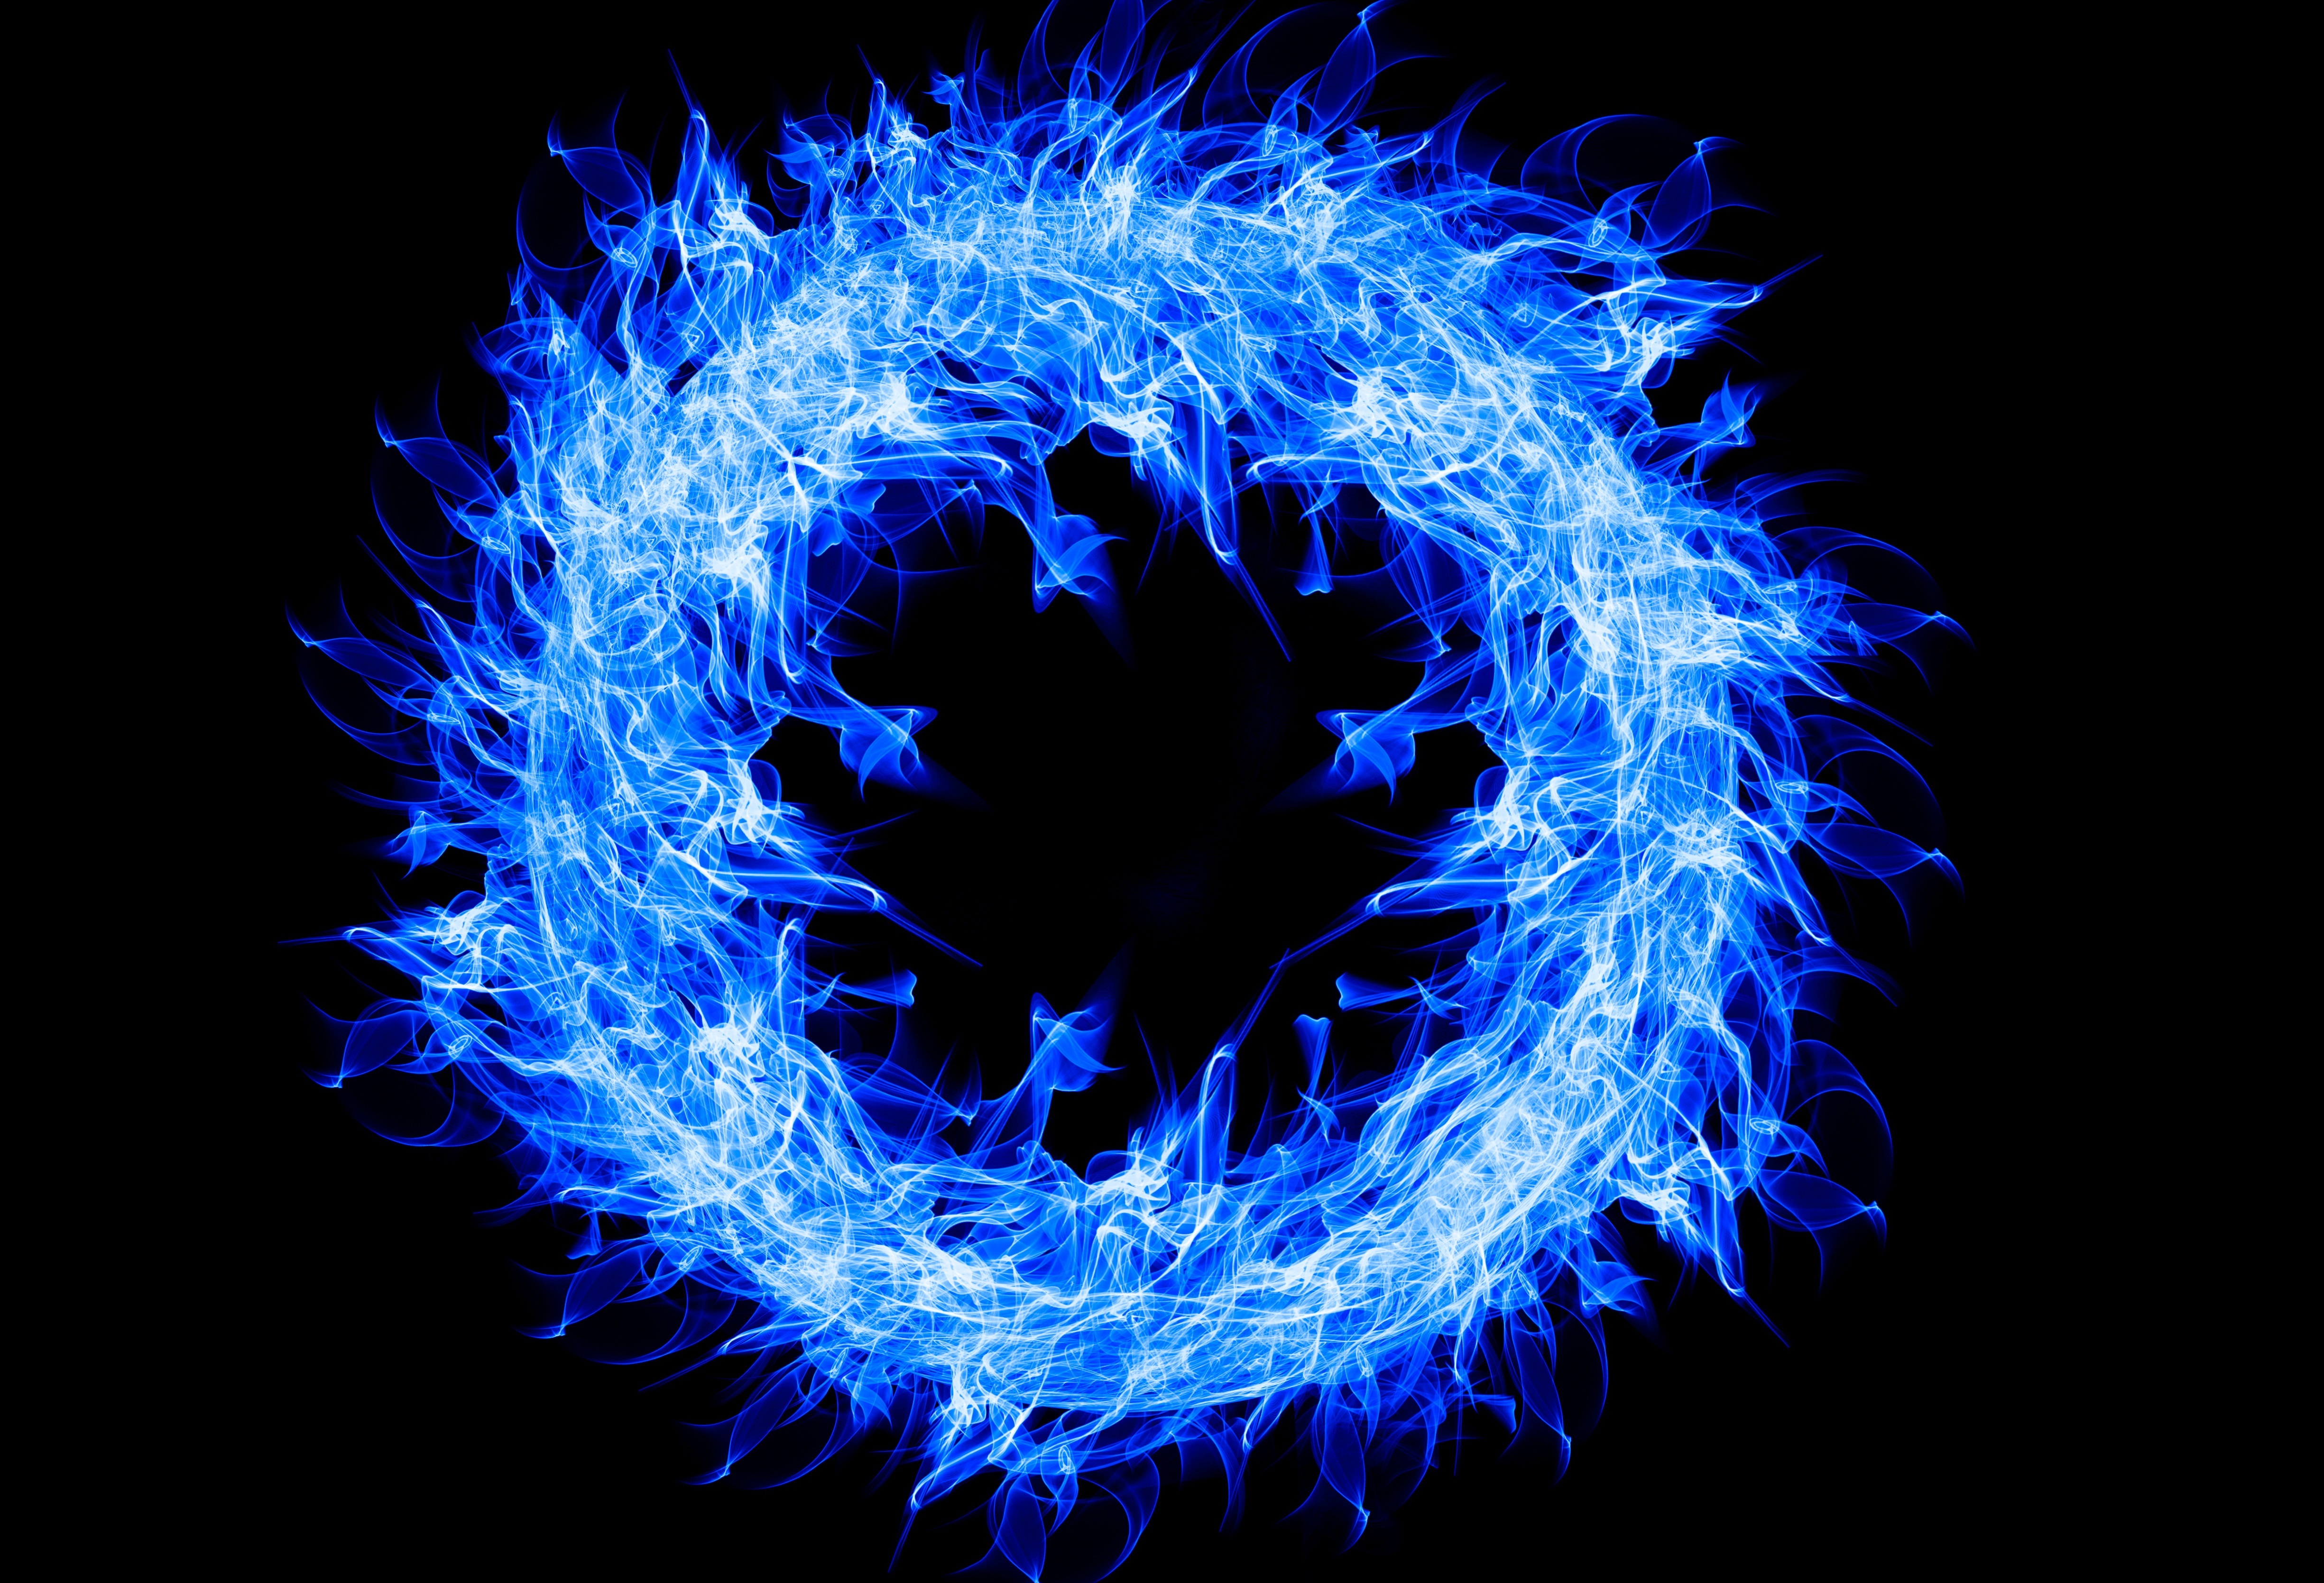 Blue Flames IPhone Wallpaper  IPhone Wallpapers  iPhone Wallpapers